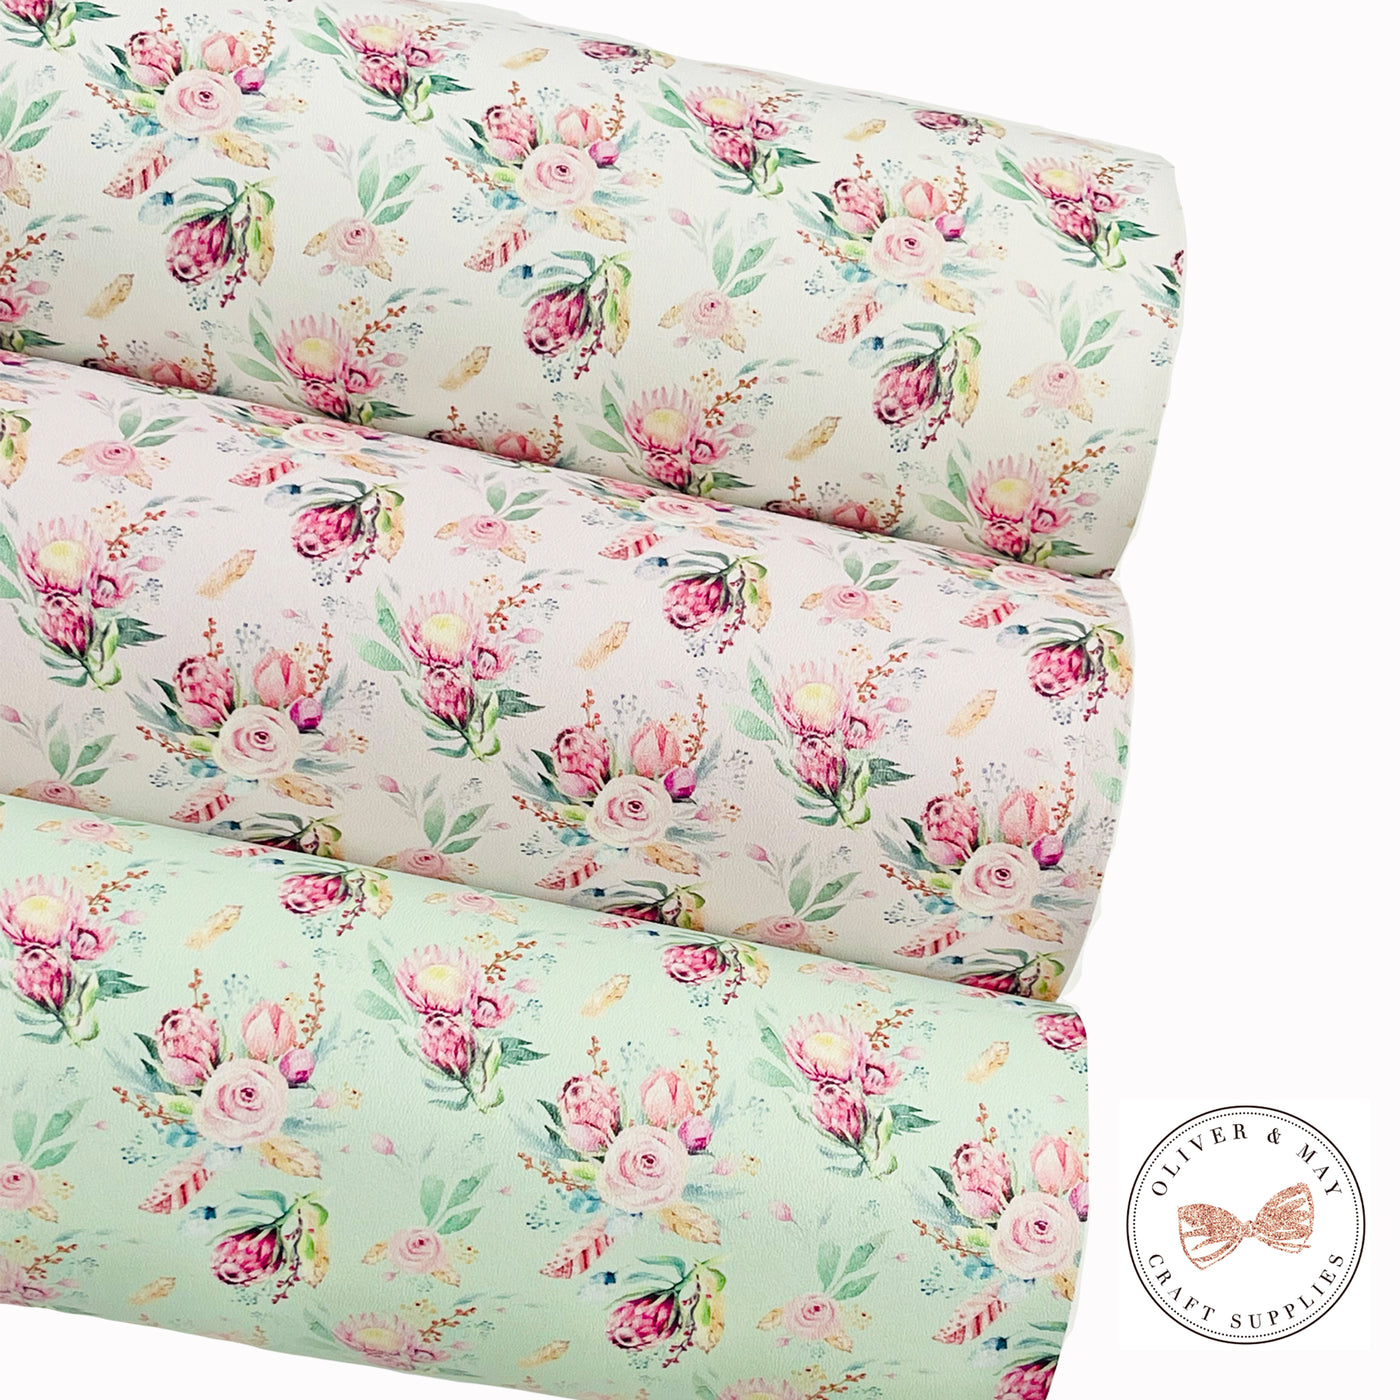 Banksia and Proteas Floral Print Faux Leatherette - Choice of 3 Colours - Litchi or Smooth